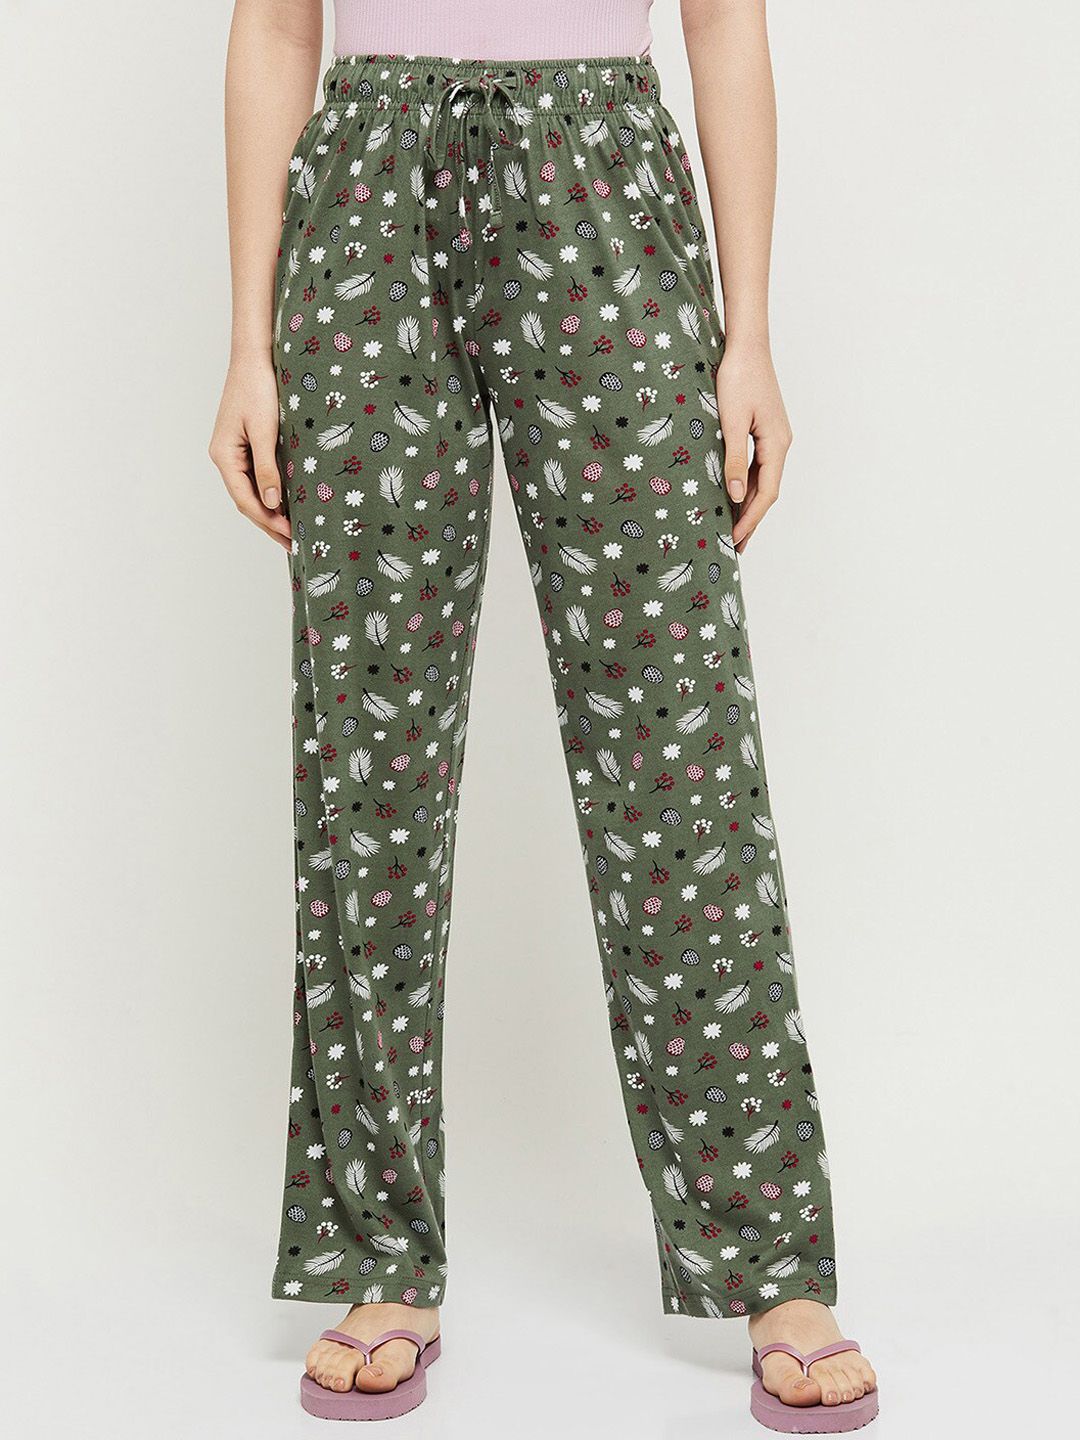 max Women Olive Green Printed Cotton Lounge Pants Price in India